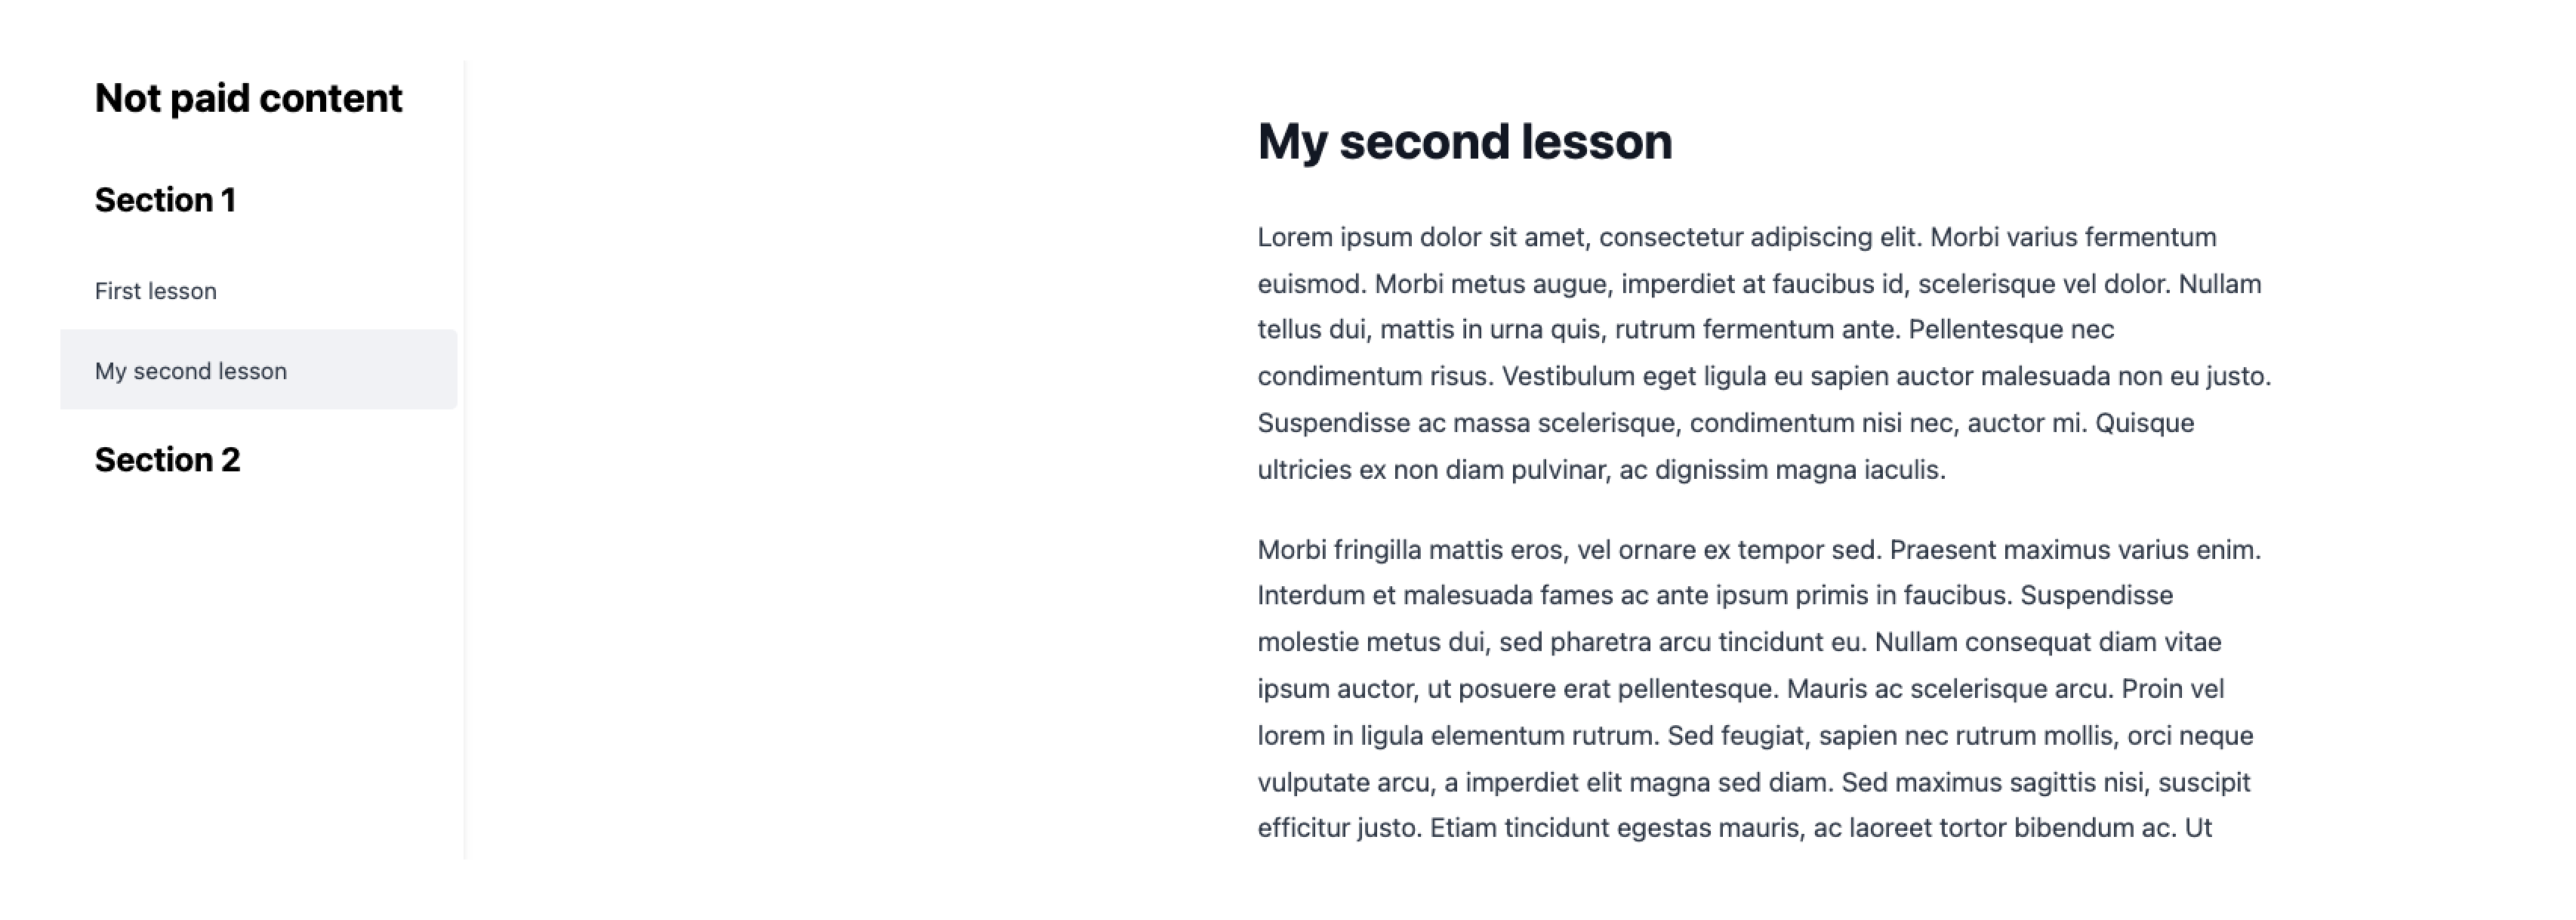 "My Second Lesson" page showing rich text and a sidebar navigation with the correct lesson selected